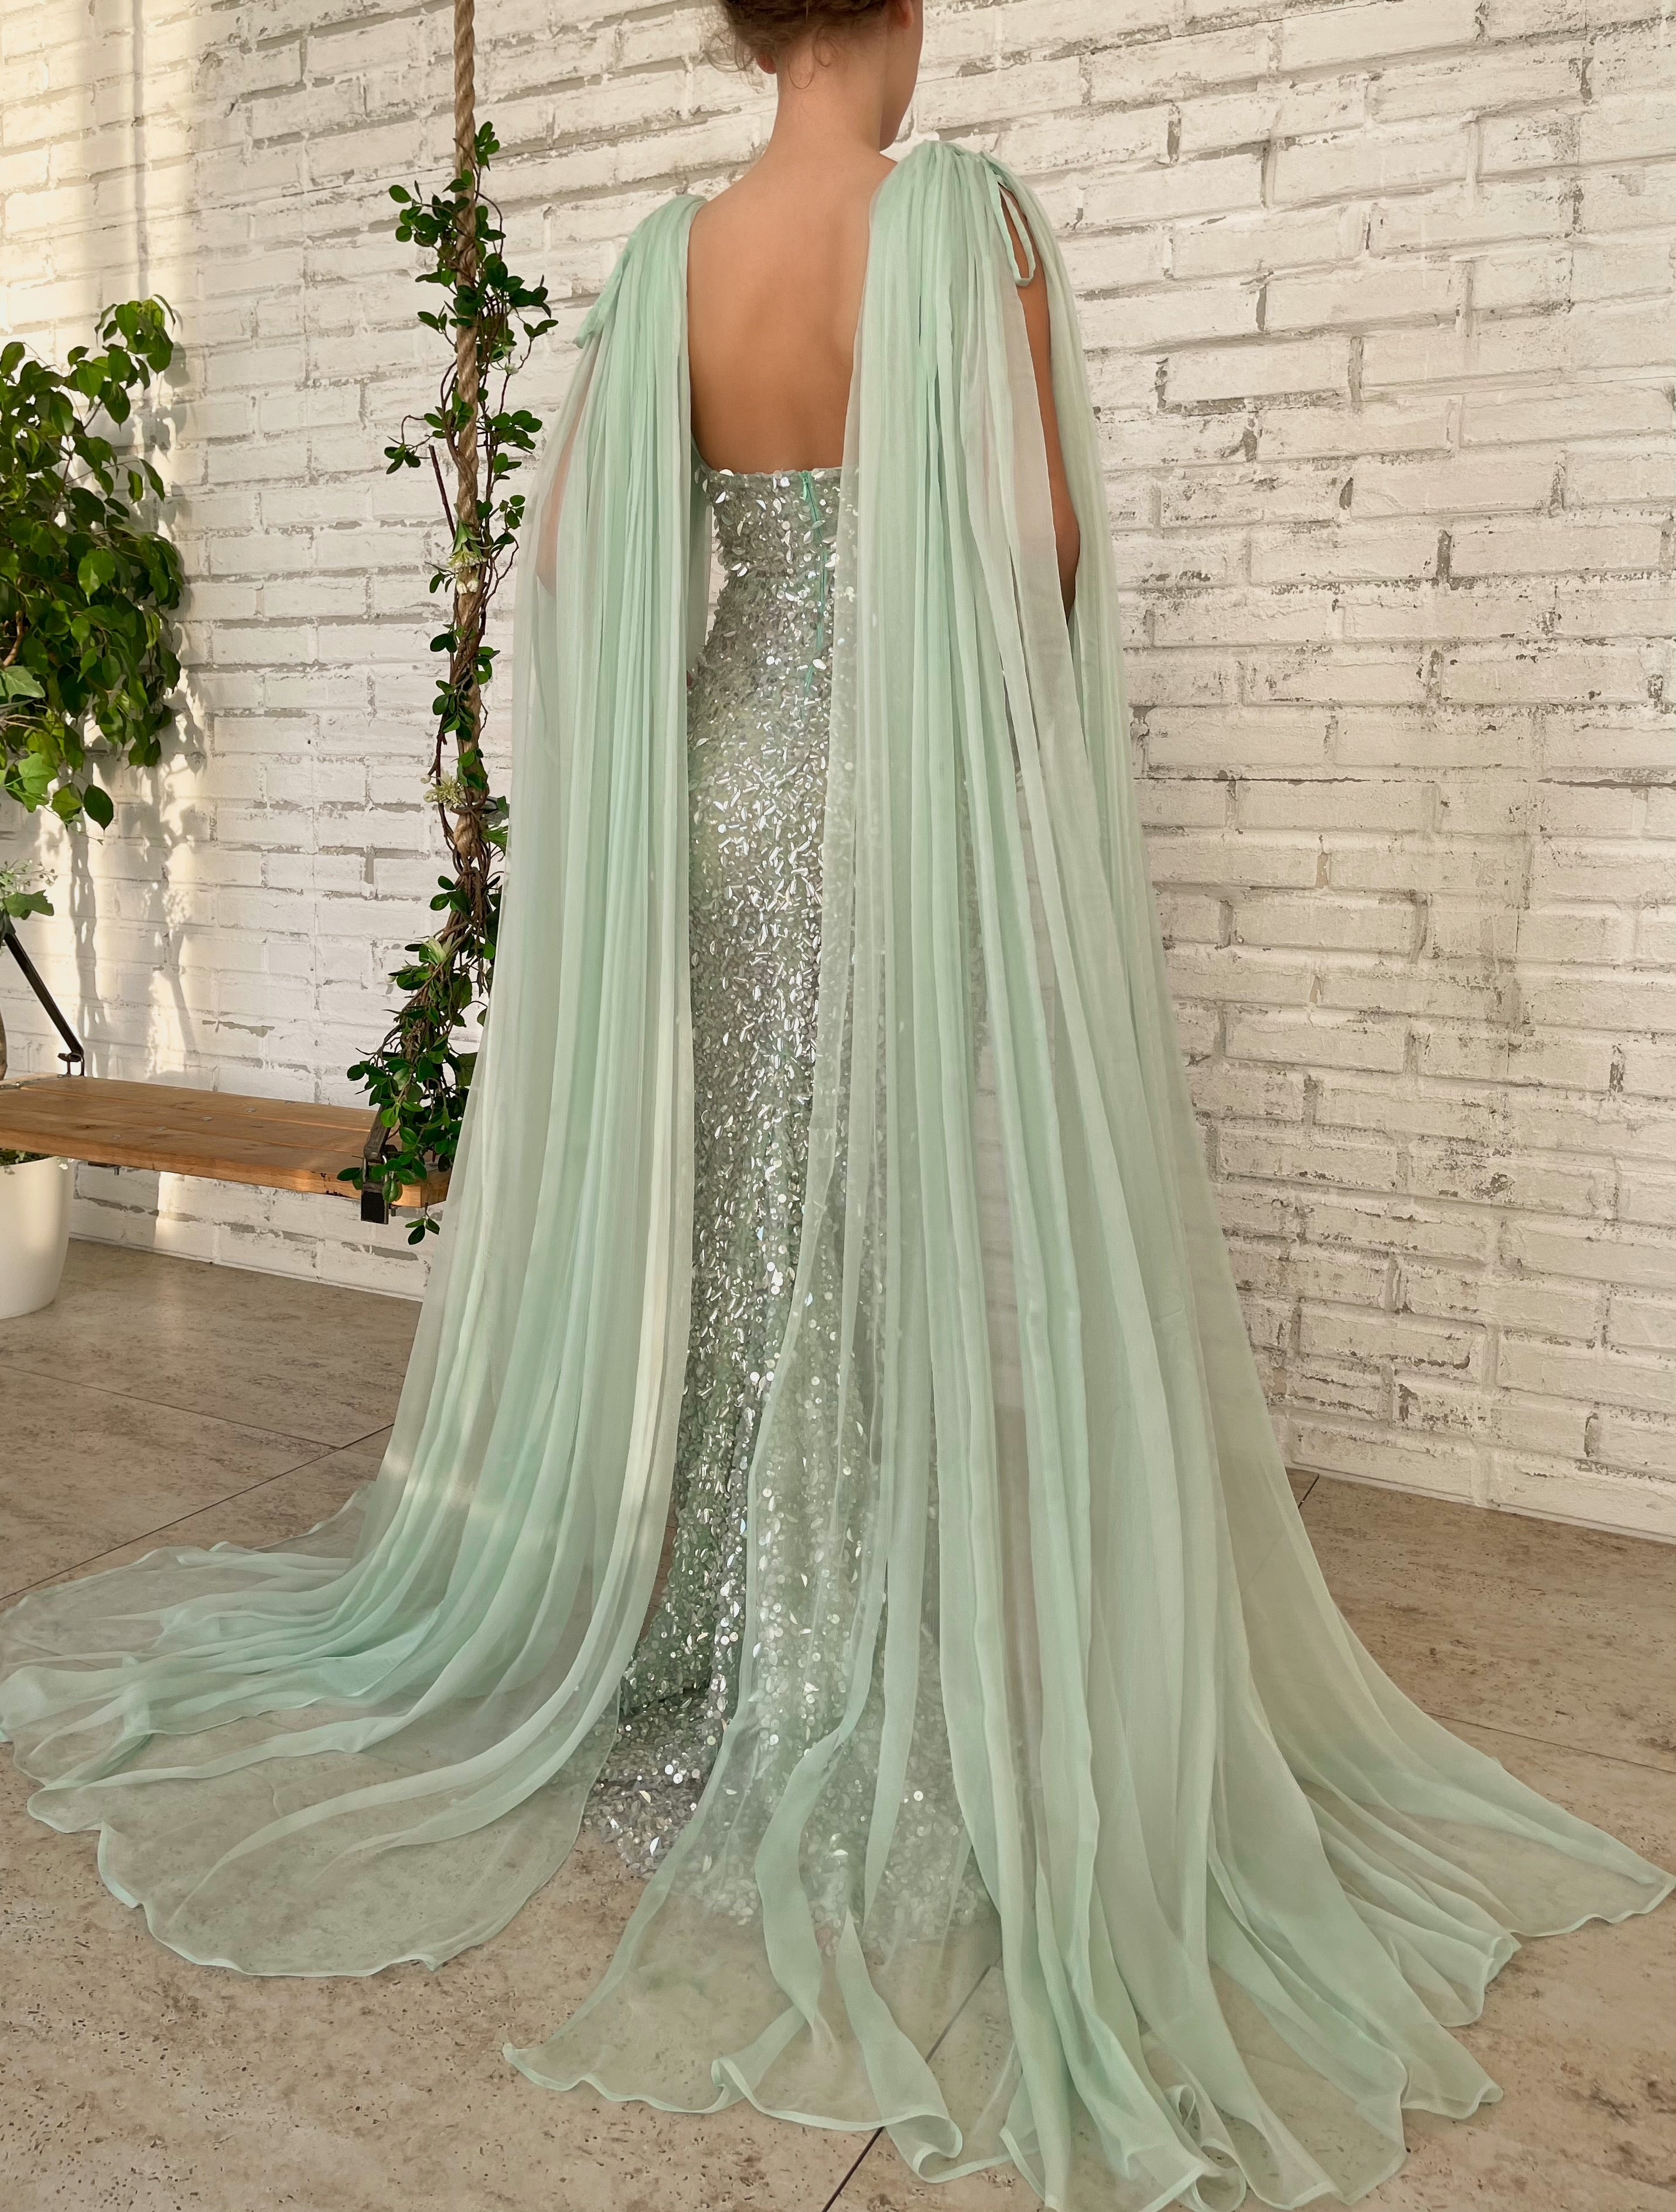 Green mermaid dress with cape sleeves and v-neck